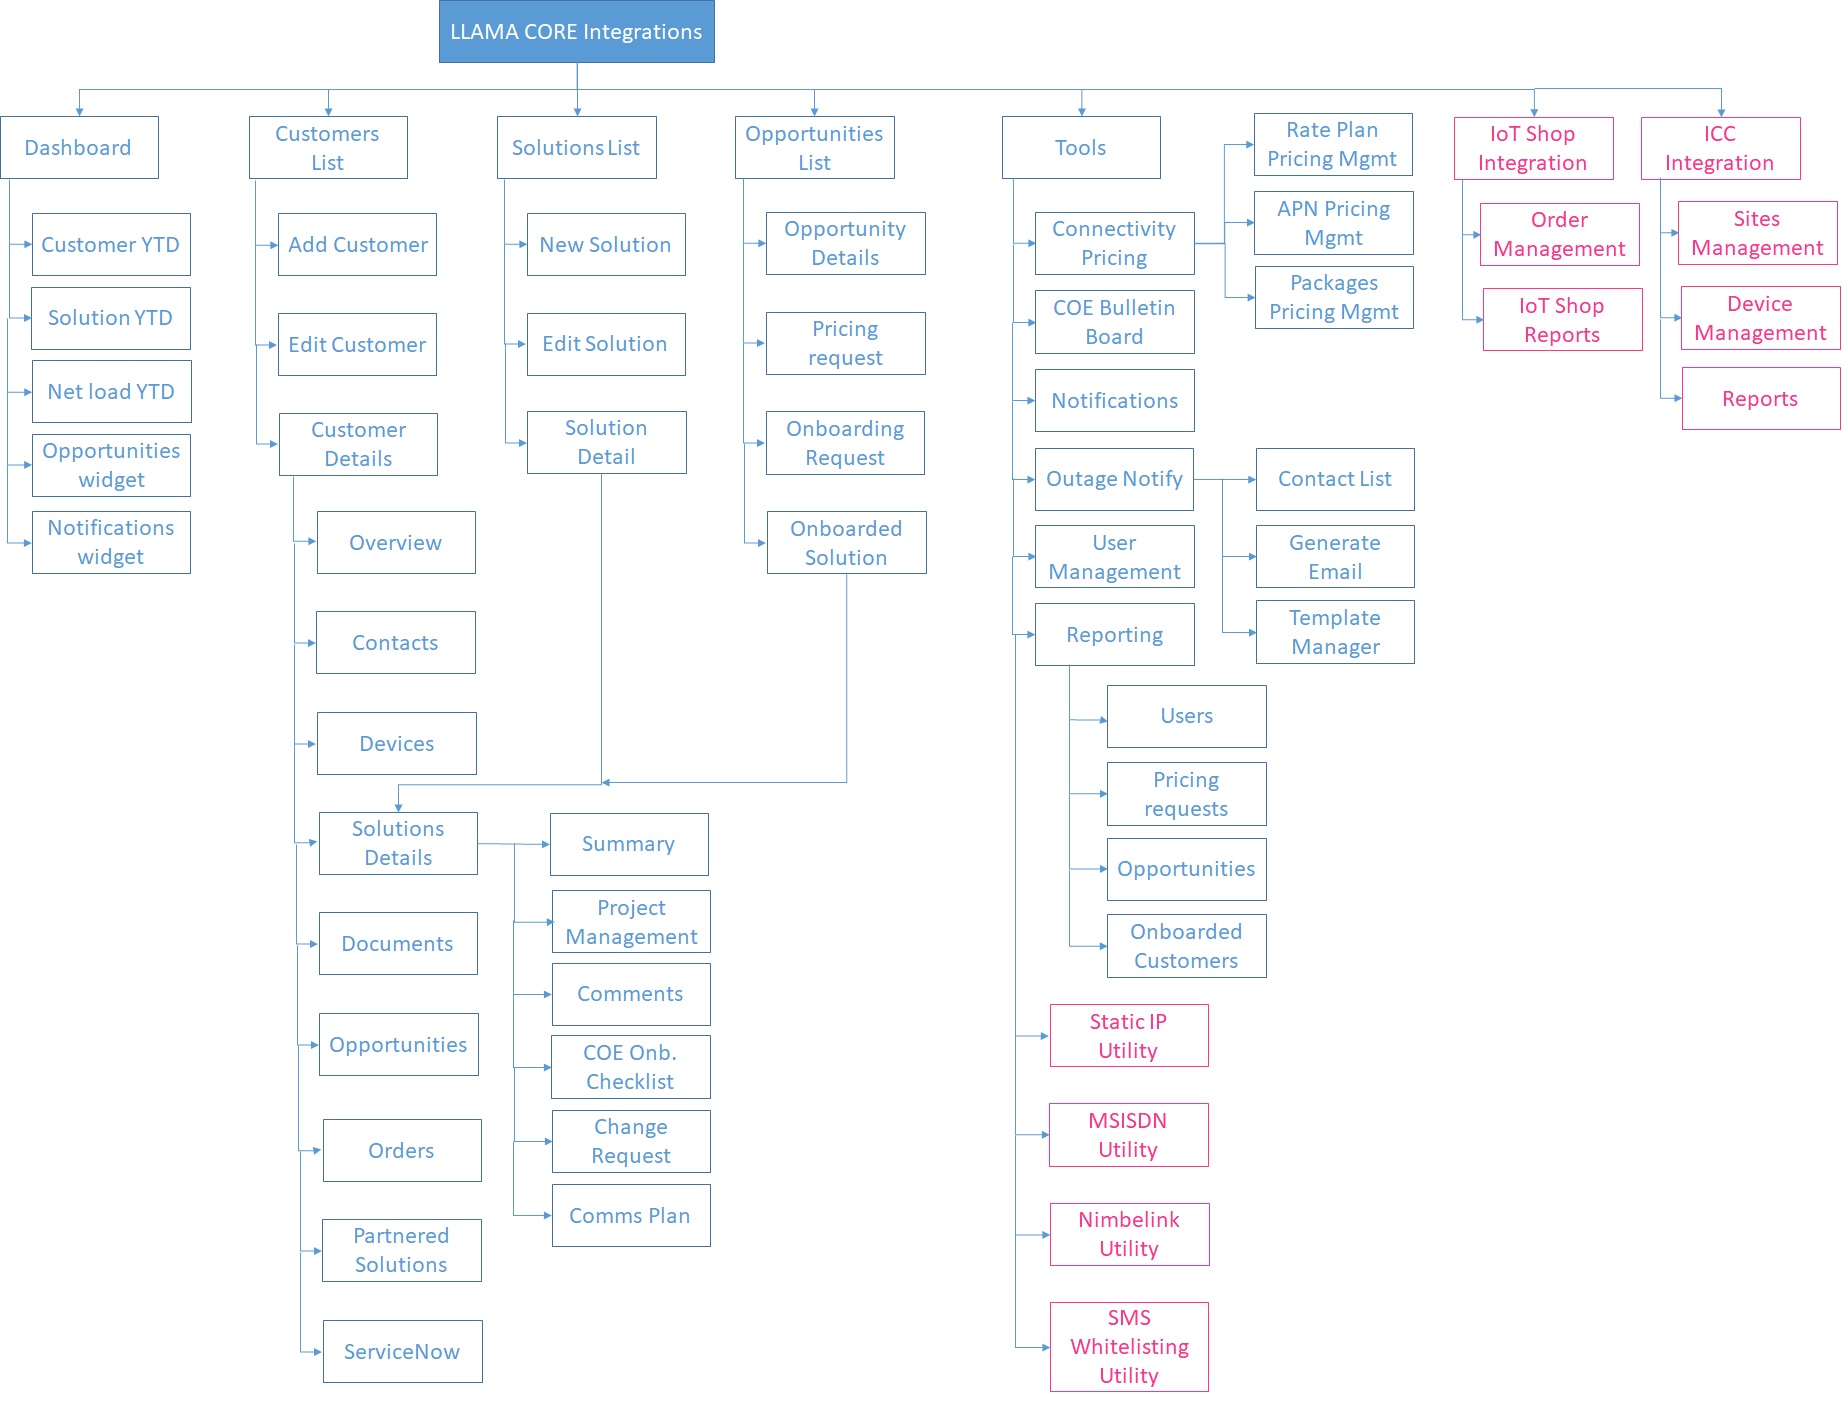 Site map of current Llama Application with integrations